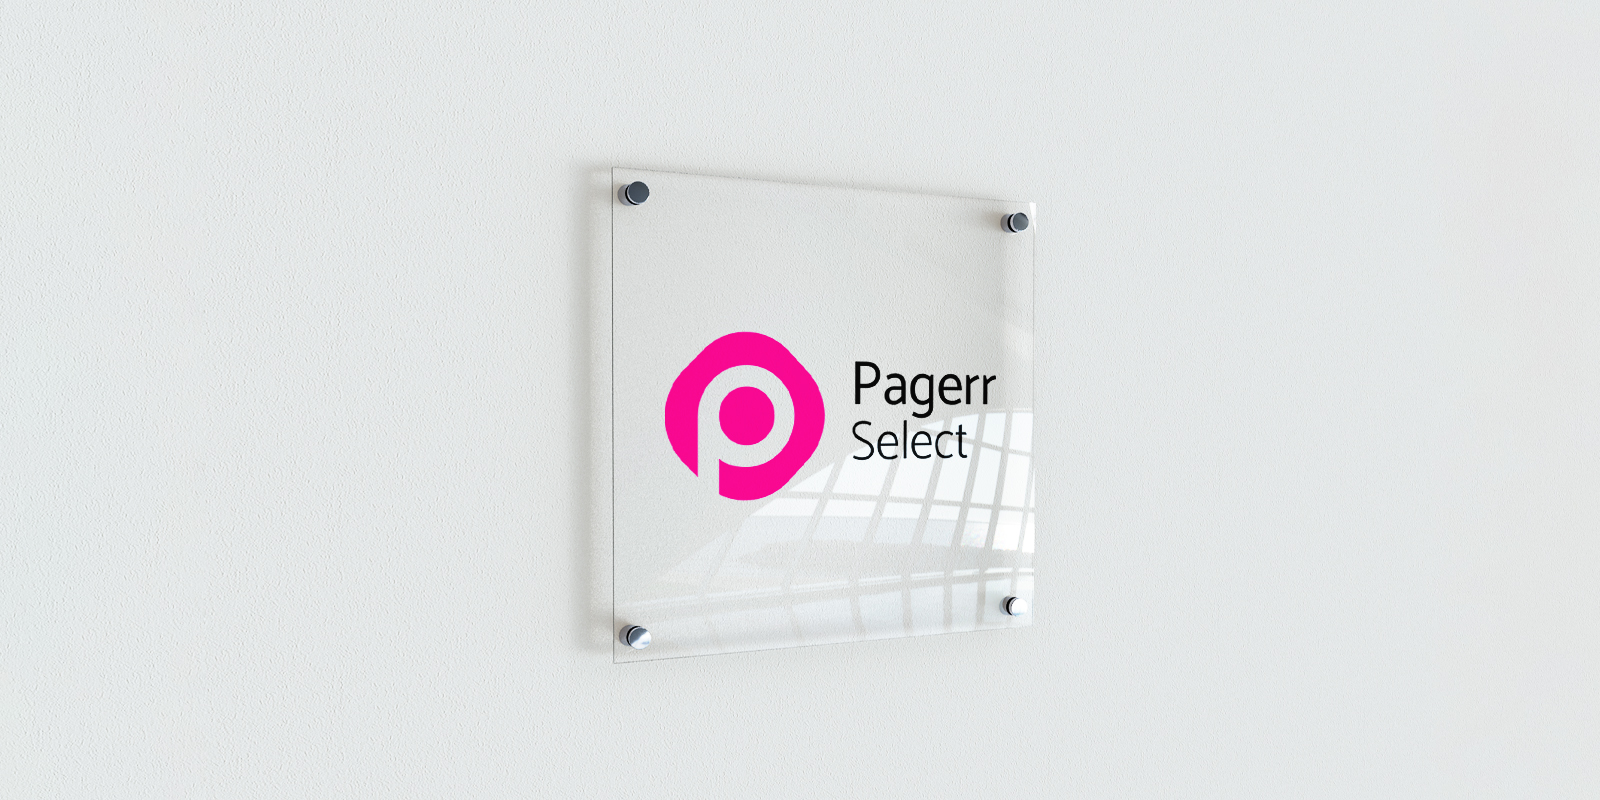 Acrylic signs in Barcelona - Print with Pagerr